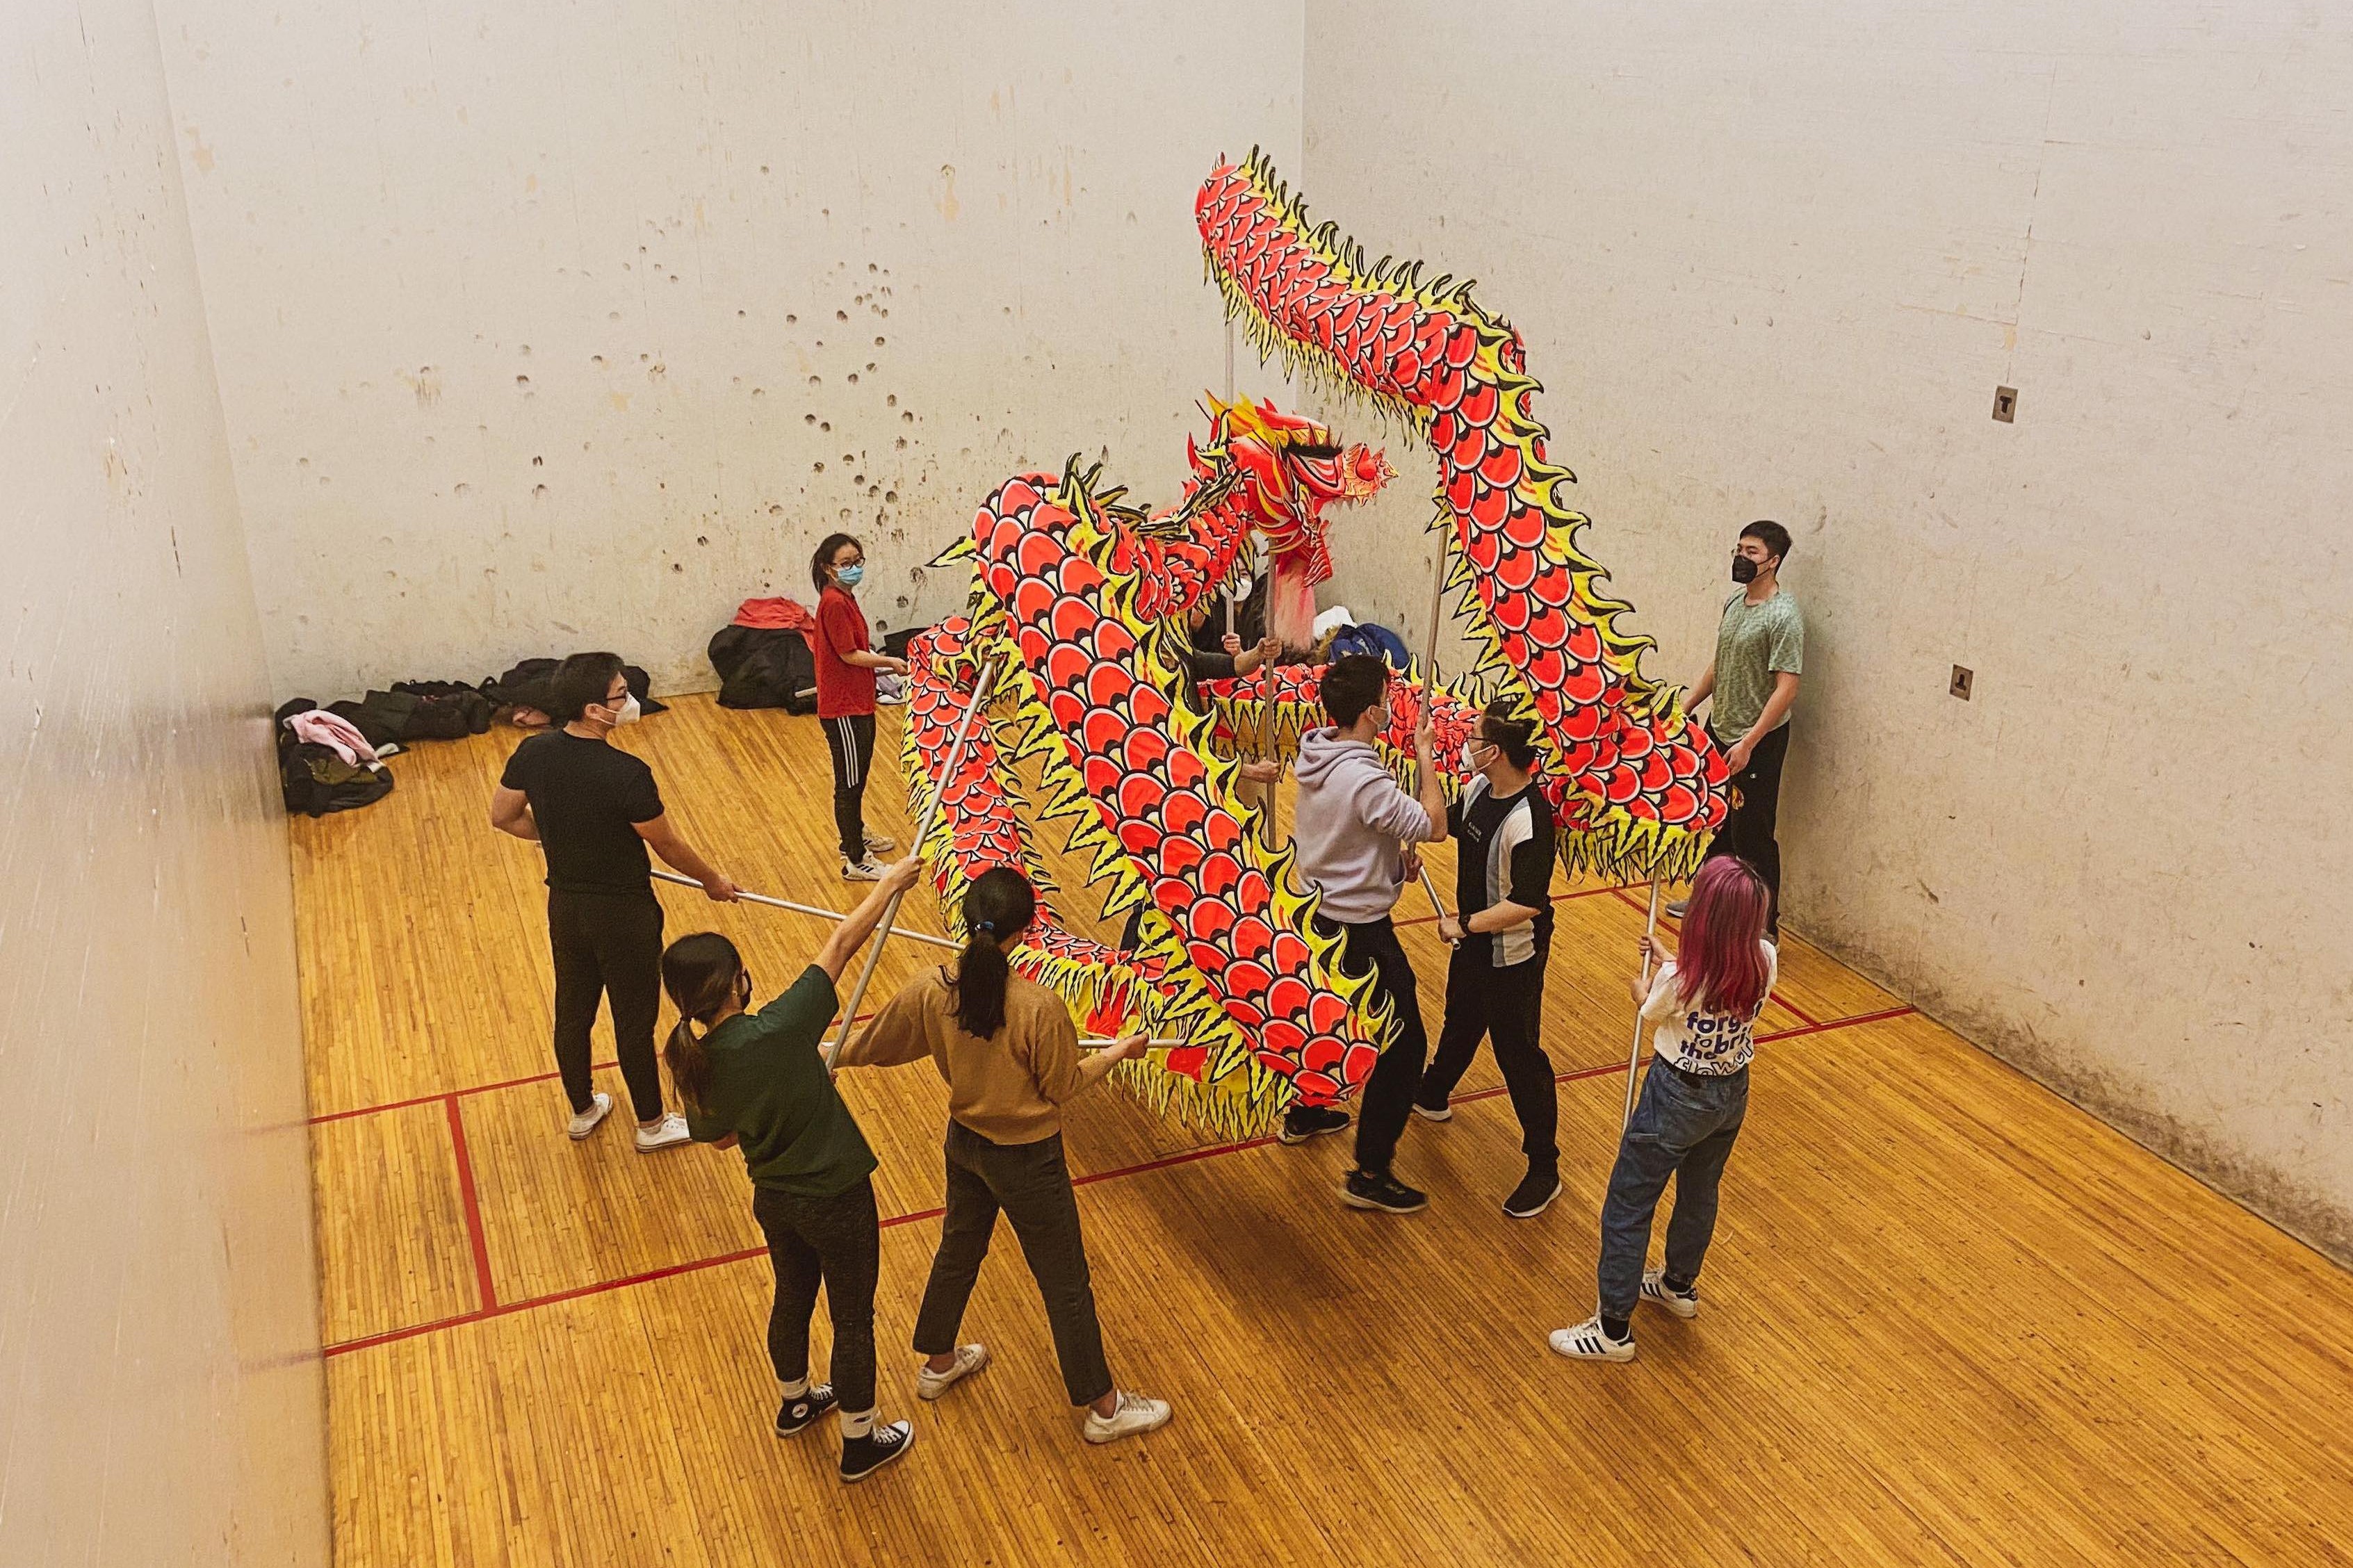 Dragon dance practice at Cabot Physical Education Center at Northeastern University